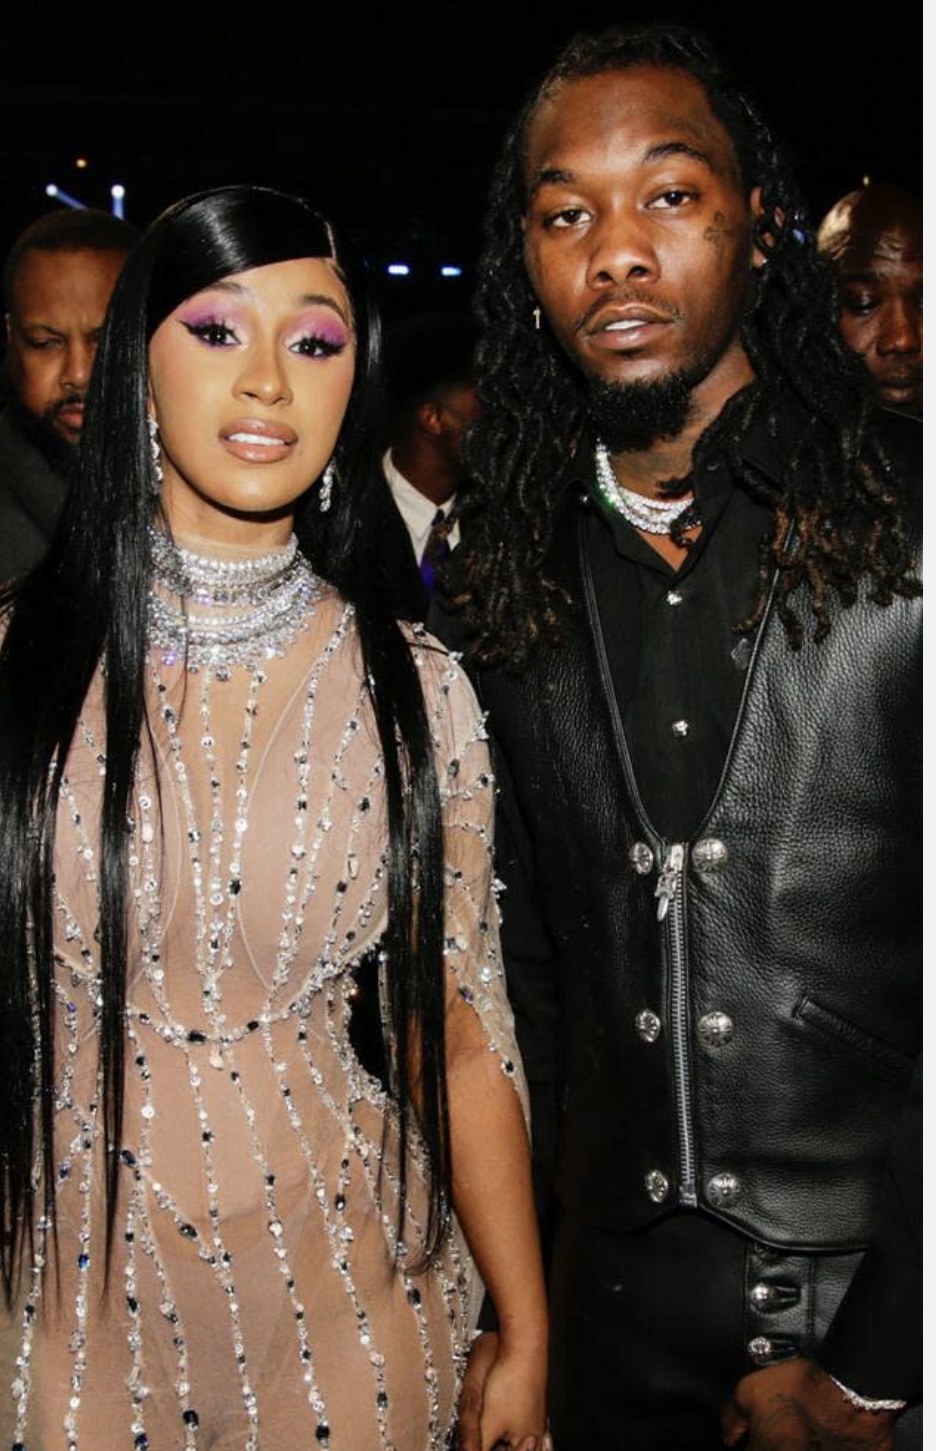 Cardi B affirms her separation from Offset4